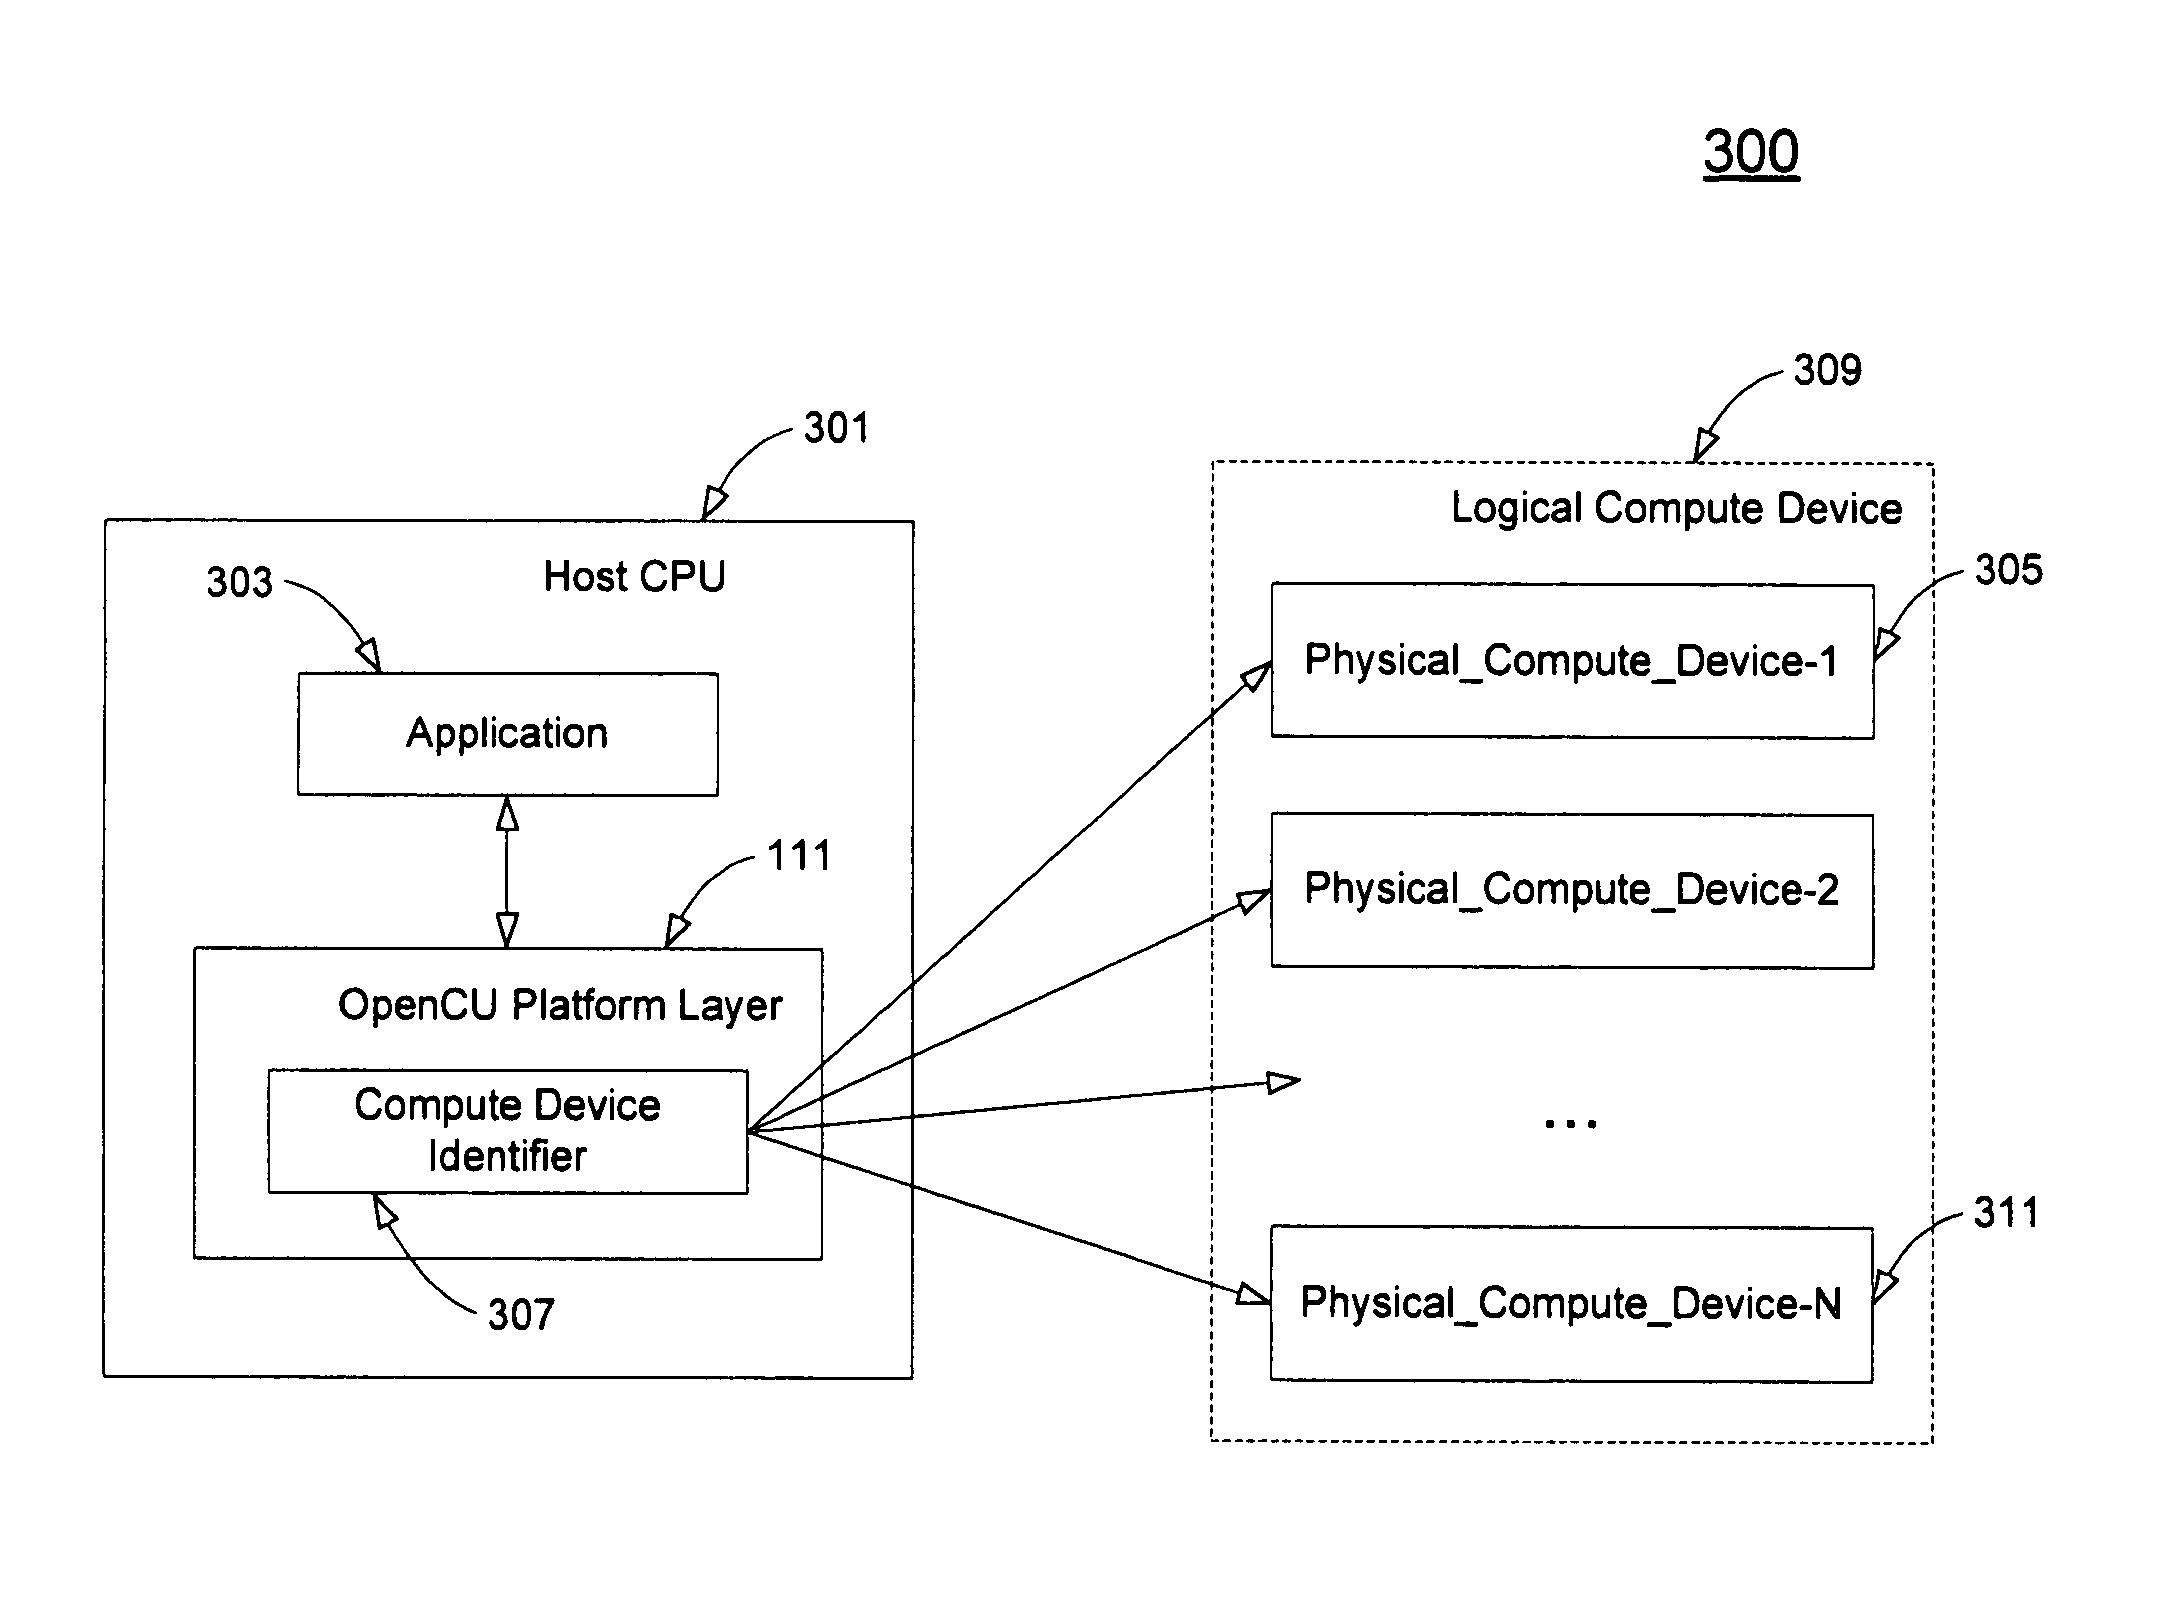 Application interface on multiple processors